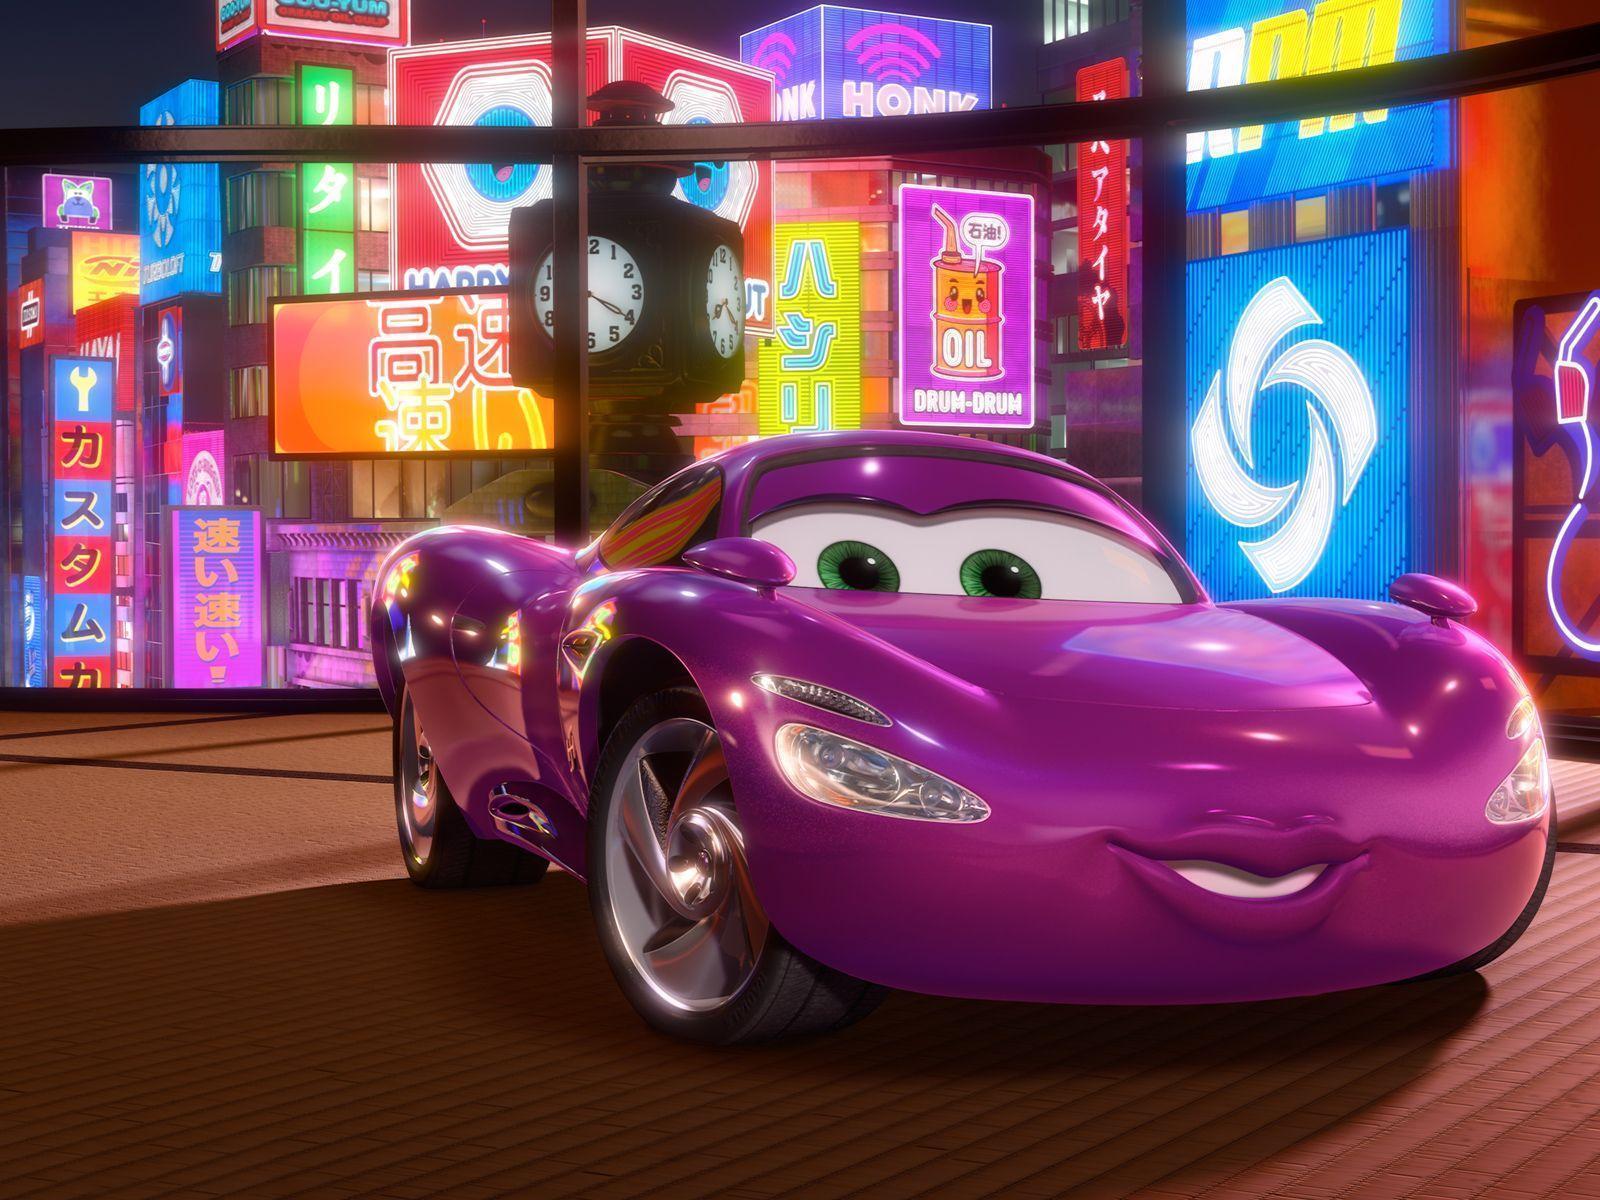 Holley Shiftwell In Cars 2 Movie W Movie